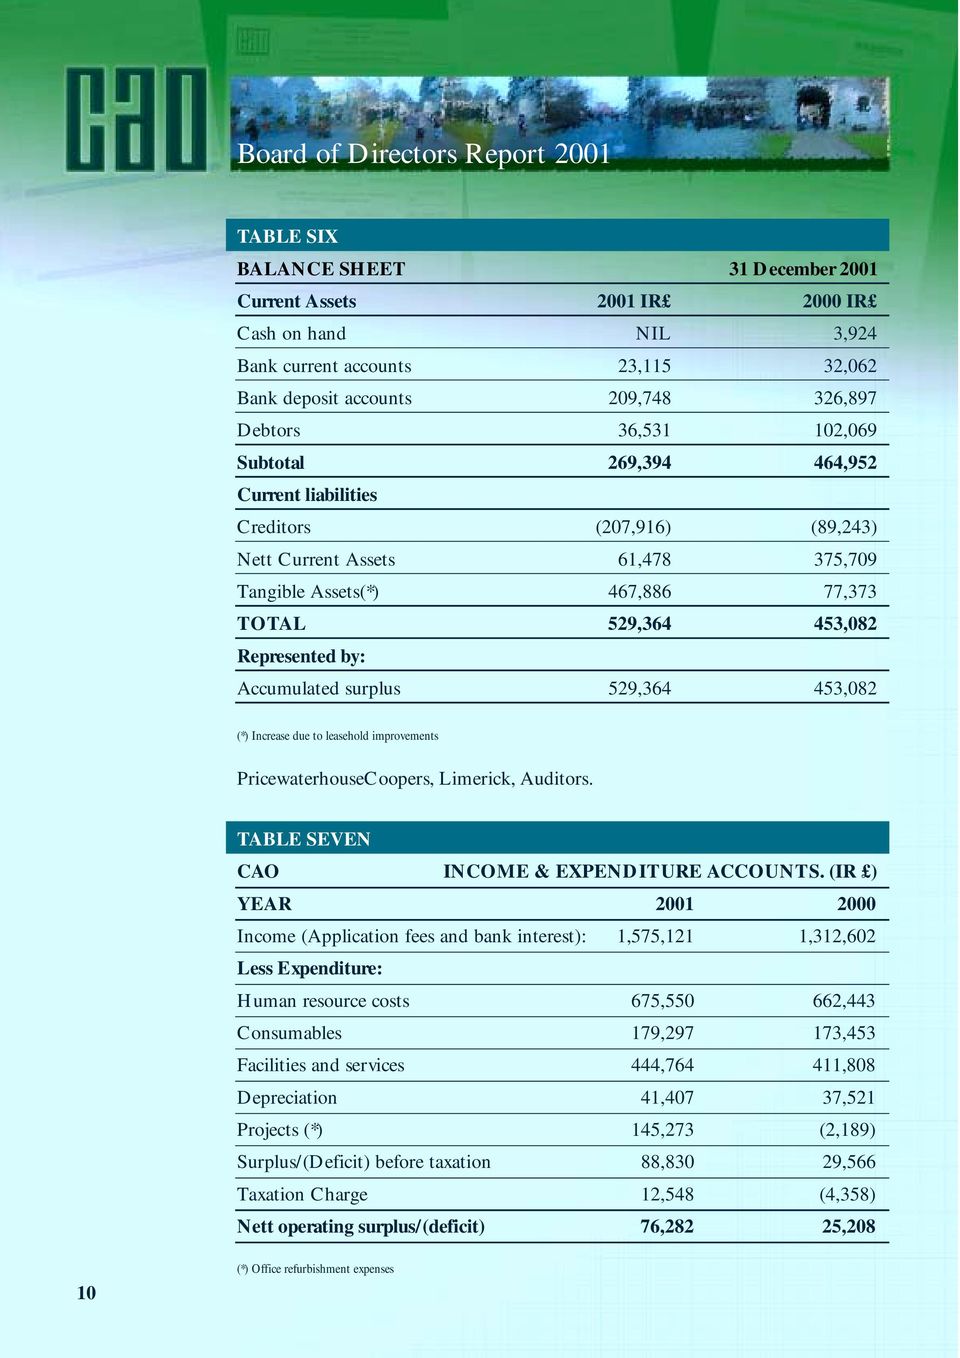 surplus 529,364 453,082 (*) Increase due to leasehold improvements PricewaterhouseCoopers, Limerick, Auditors. TABLE SEVEN CAO INCOME & EXPENDITURE ACCOUNTS.